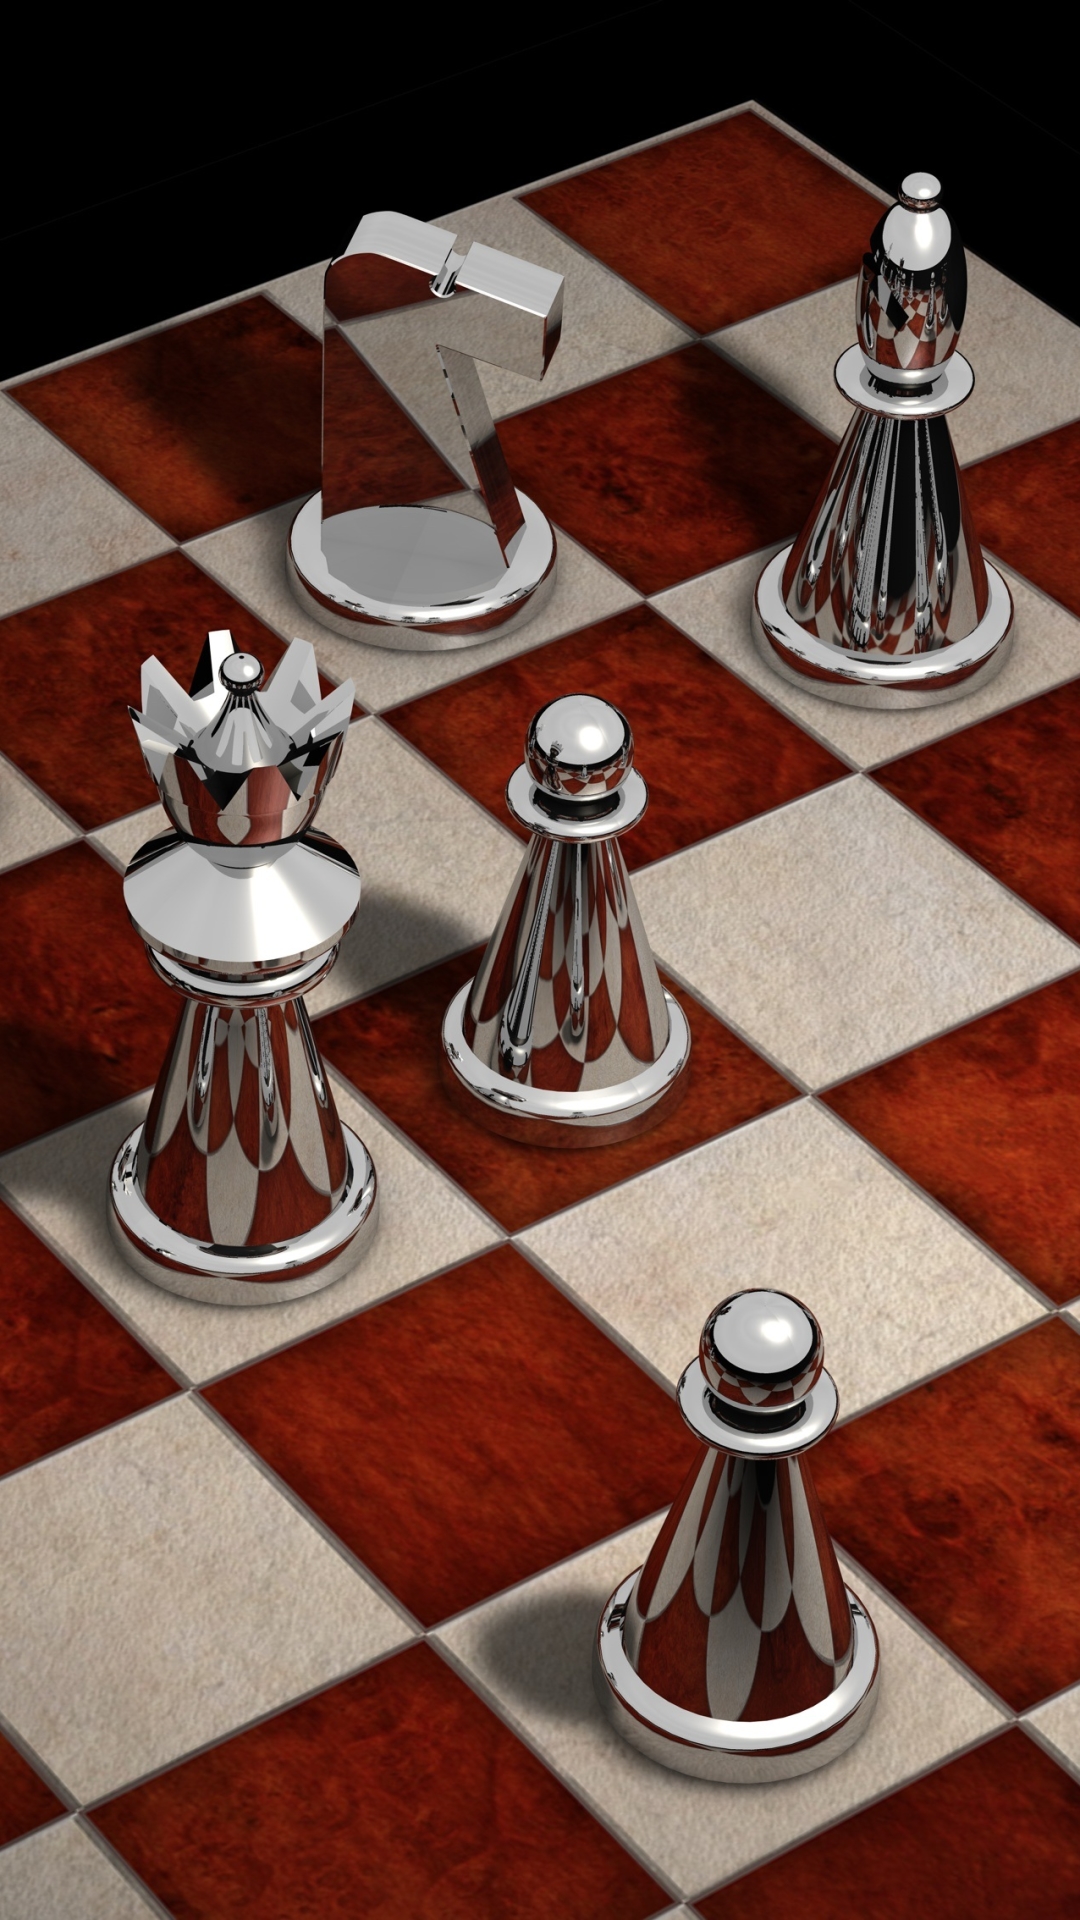 Red and White Chessboard Set